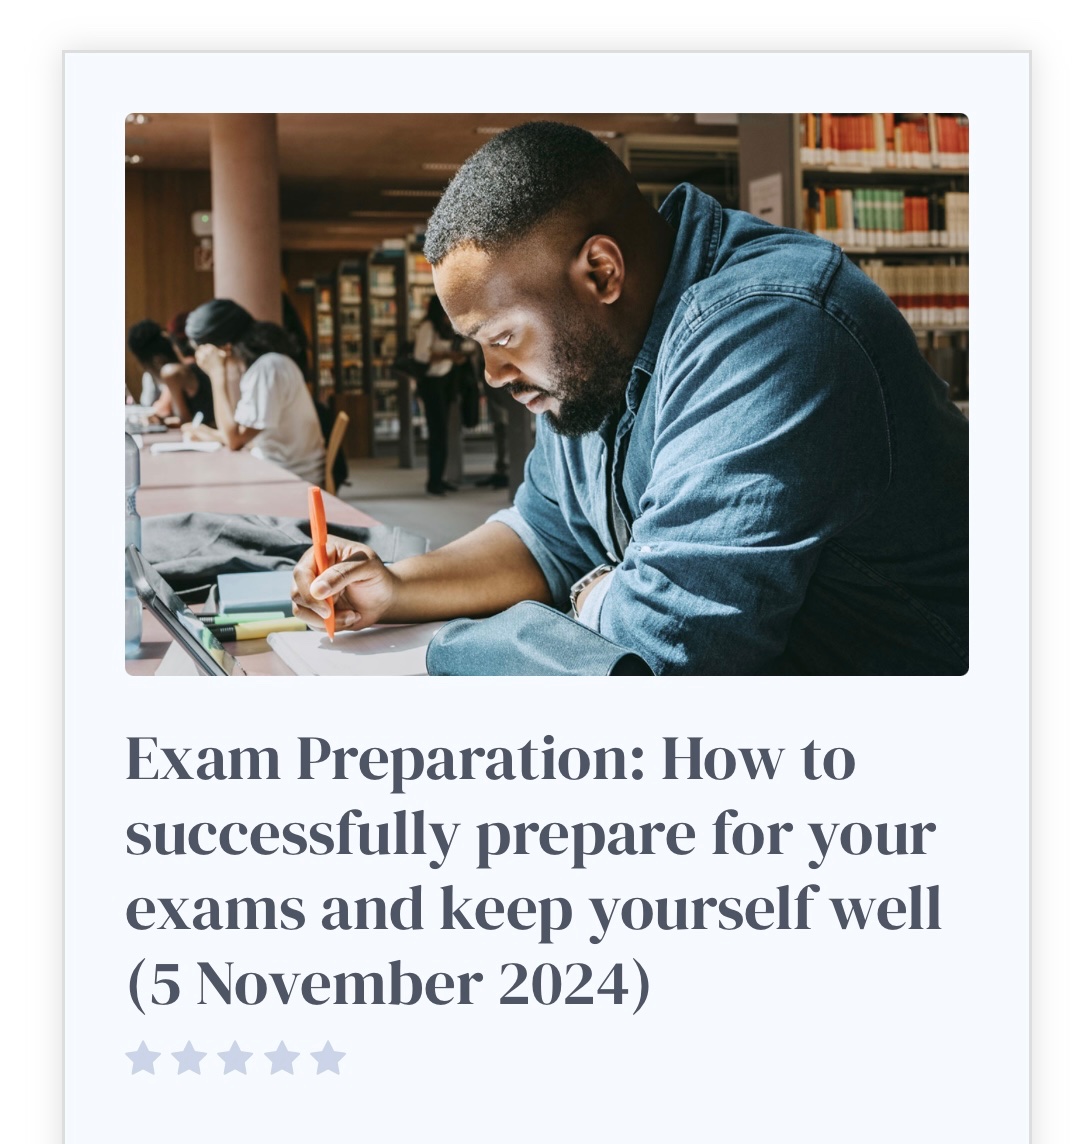 The exam preparation webinar I have developed for the @BPSOfficial is now live for bookings. Please take a look and use the link to sign up or share with any psychology students you may know! 👩‍💻 learn.bps.org.uk/local/intellic… #exam #preparation #support #revision